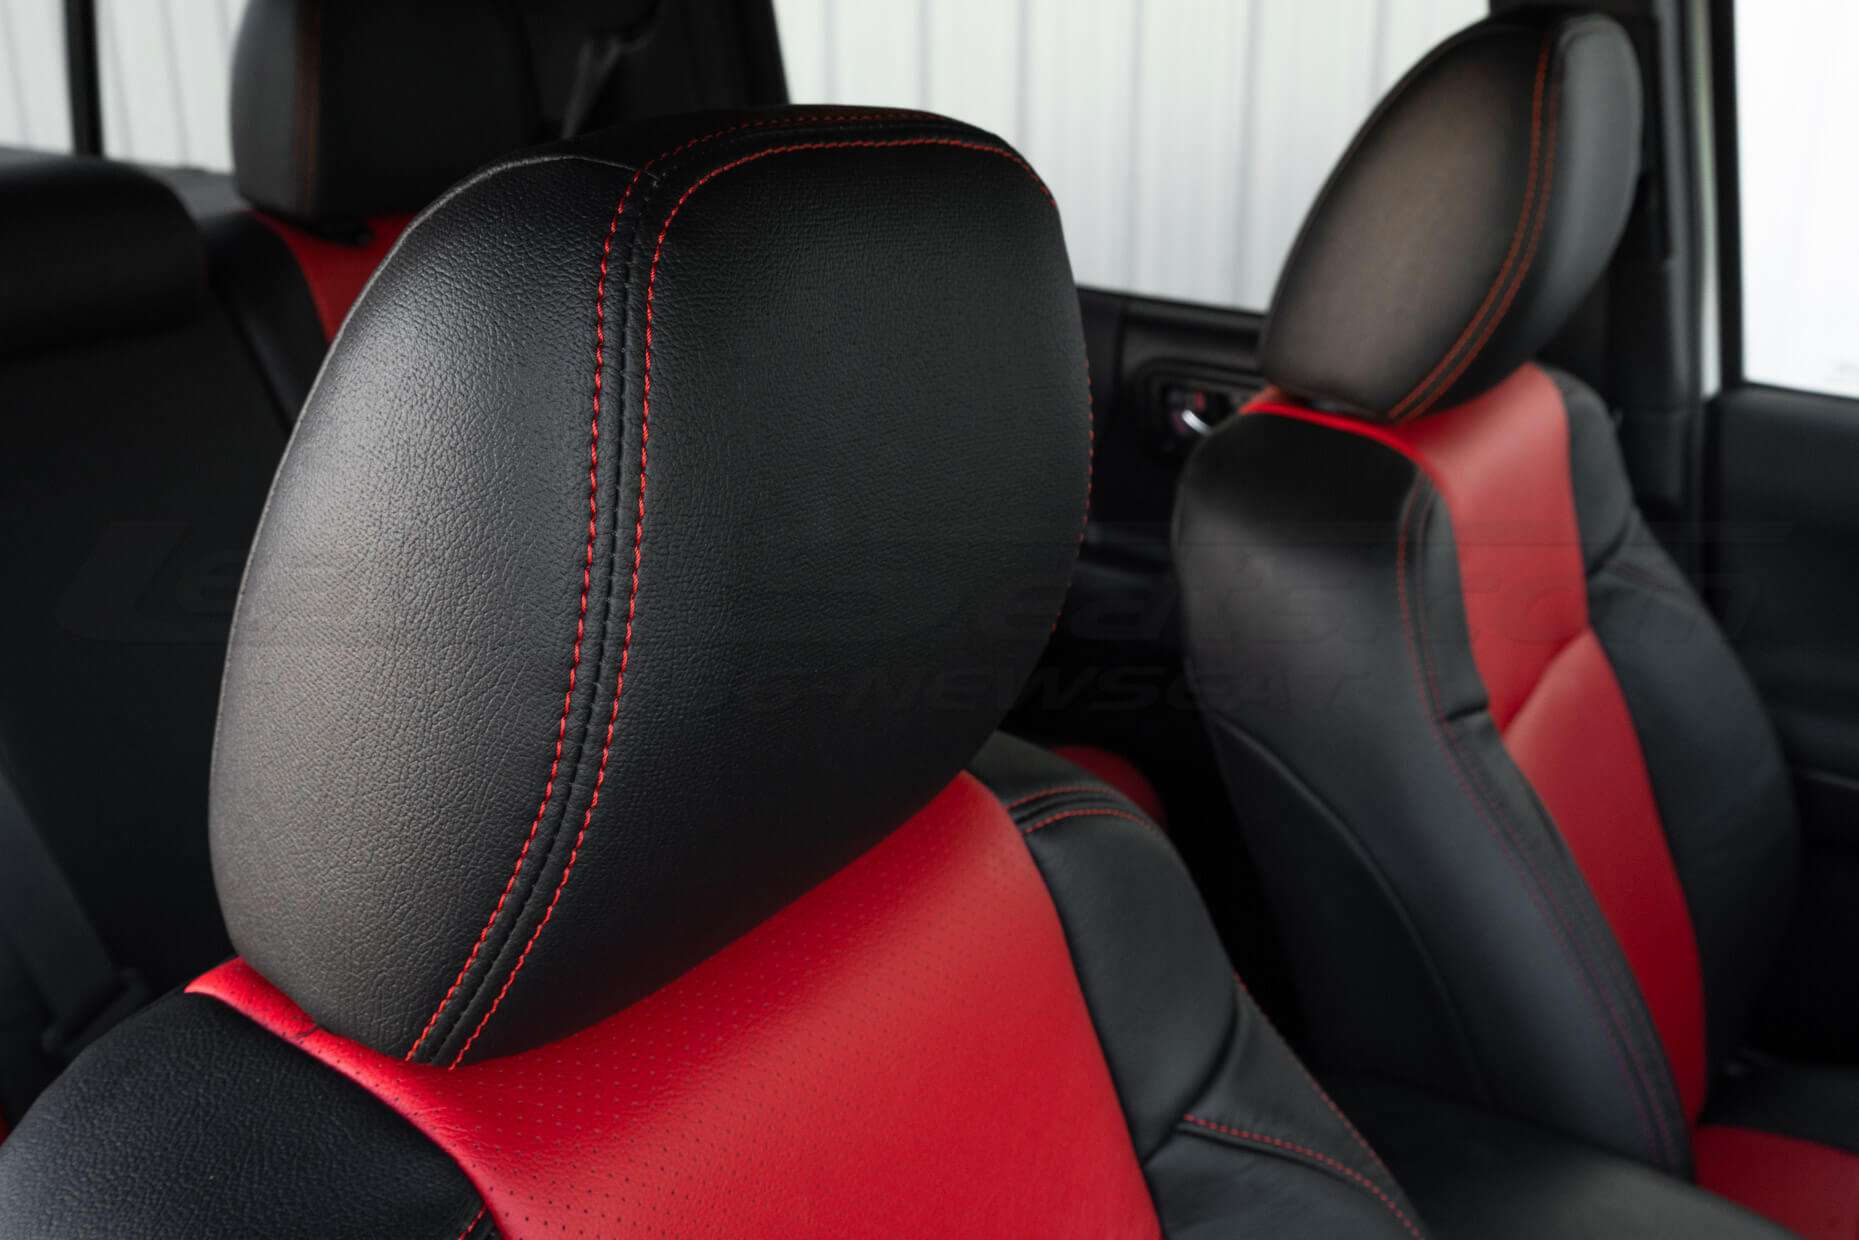 Black leather headrest with bright red contrast stitching